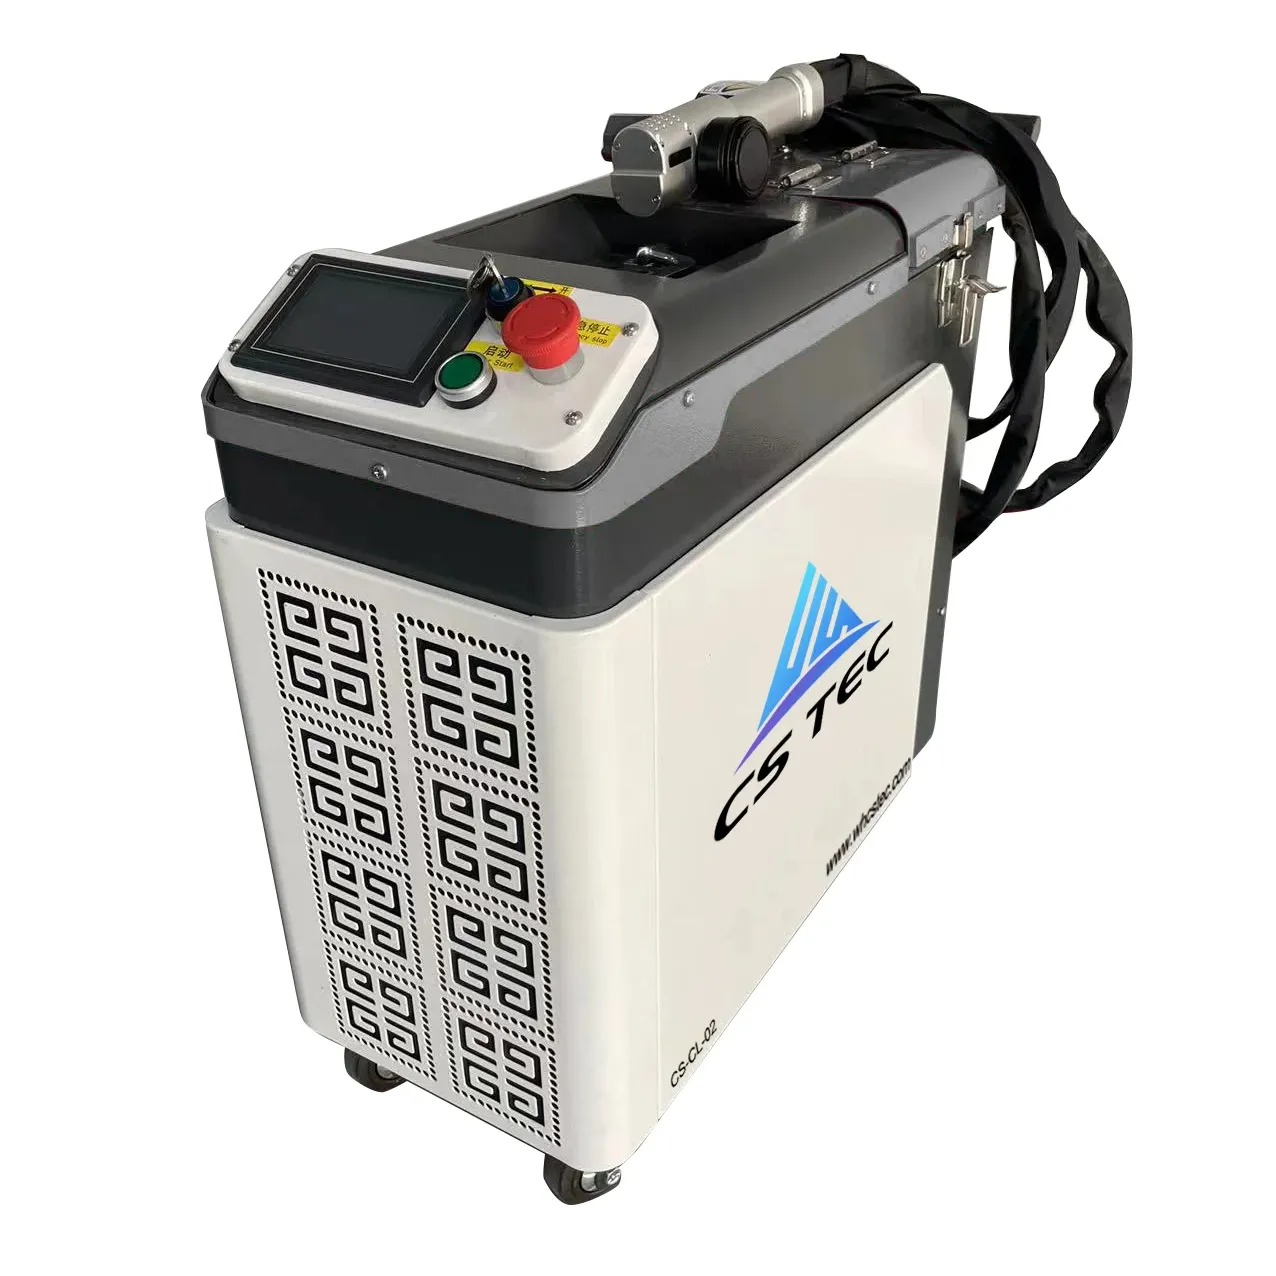 Revolutionary Rust Cleaning Technology: Dynamic 1000W-3000W Metal Fiber Laser Cleaner